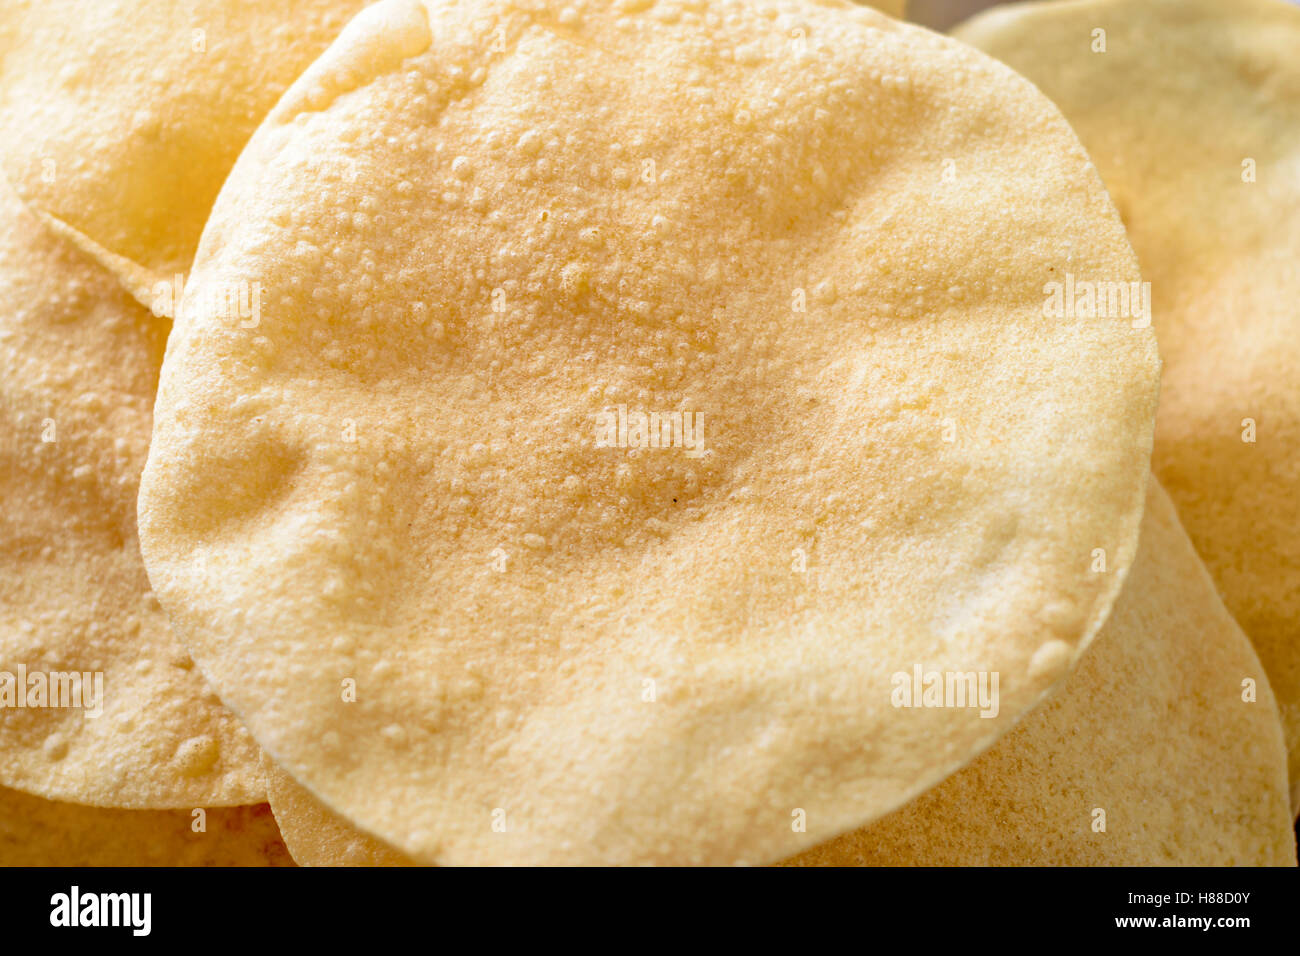 Papdoms (traditional fried South Indian crackers) Stock Photo